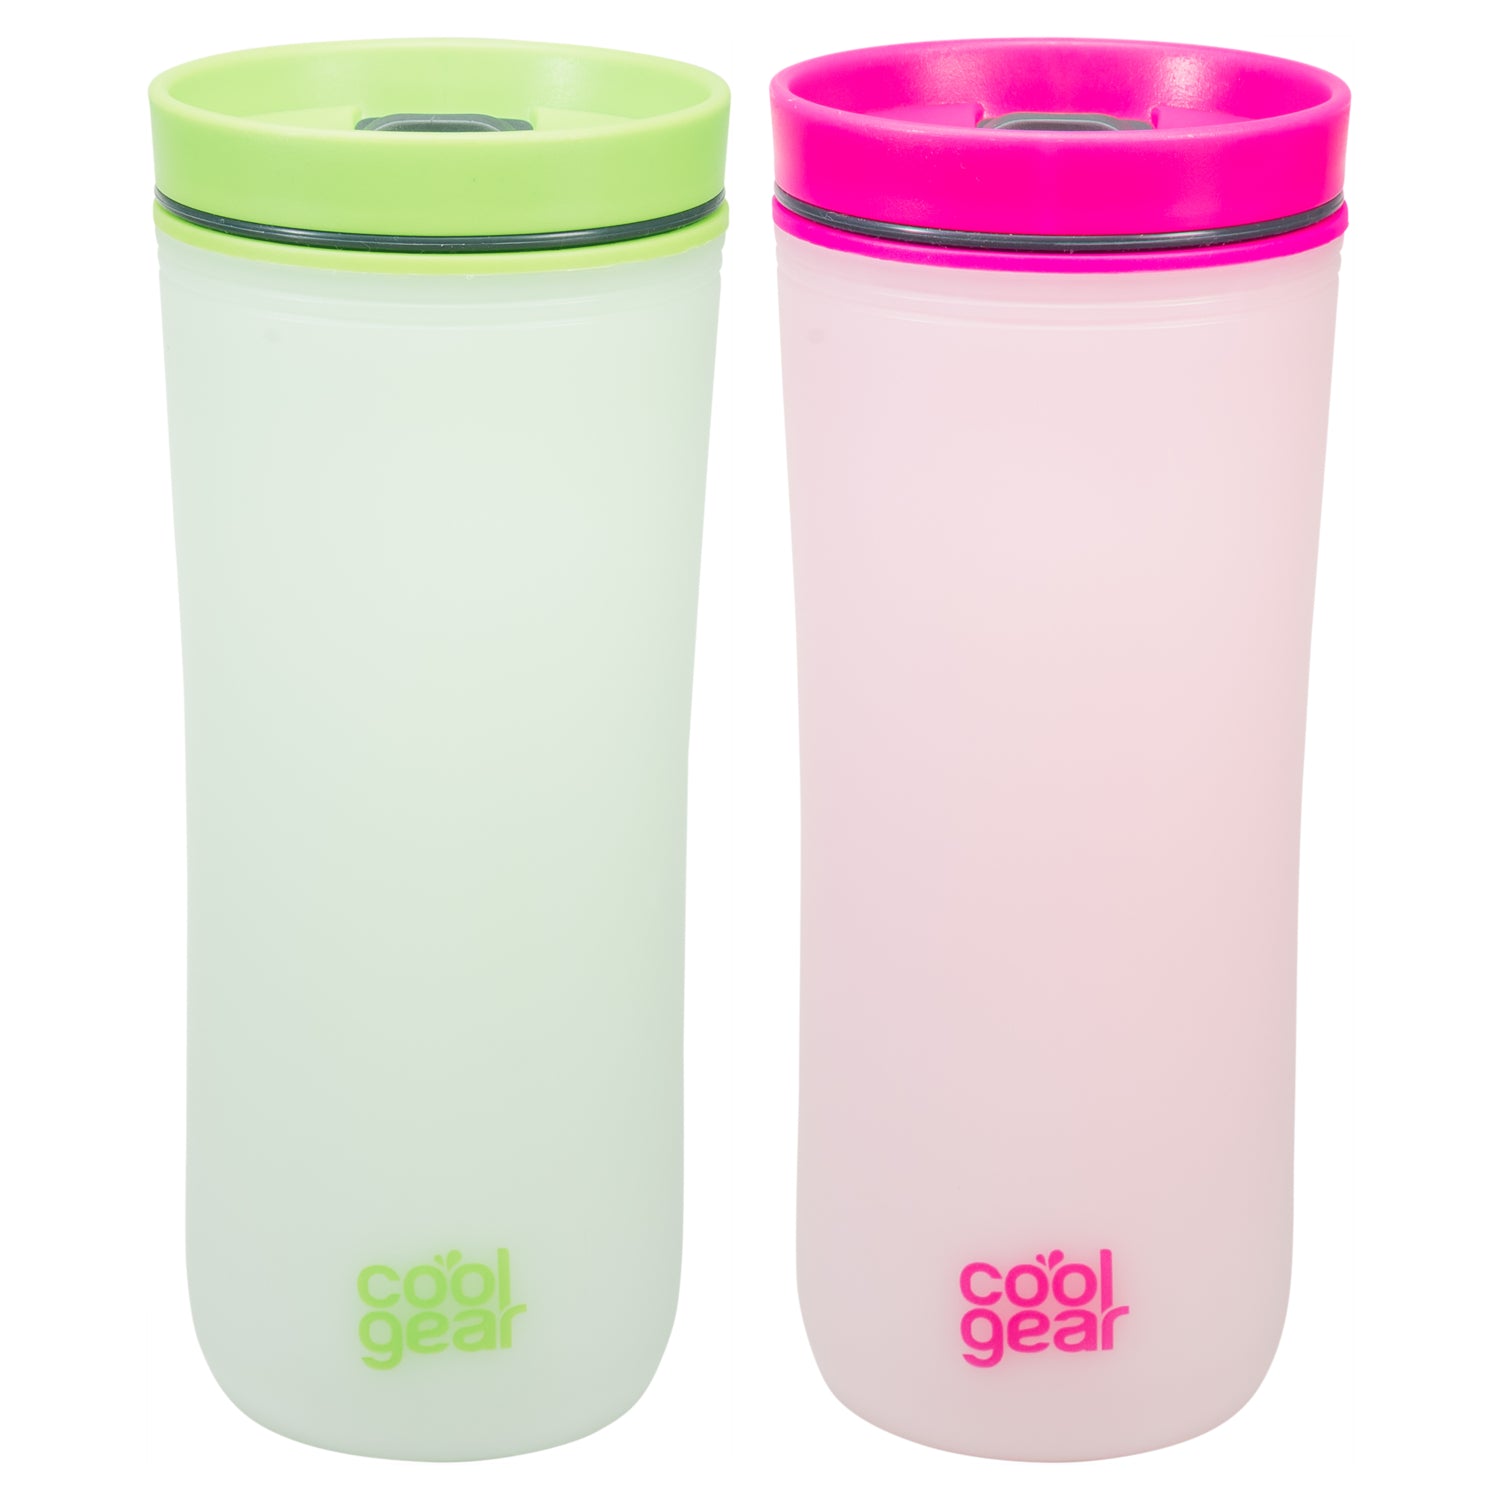 2 Pack COOL GEAR 16 oz Sumatra Coffee Travel Mug with Spill Resistant Slider Lid | Re-Usable Colored Tumbler - image 3 of 12